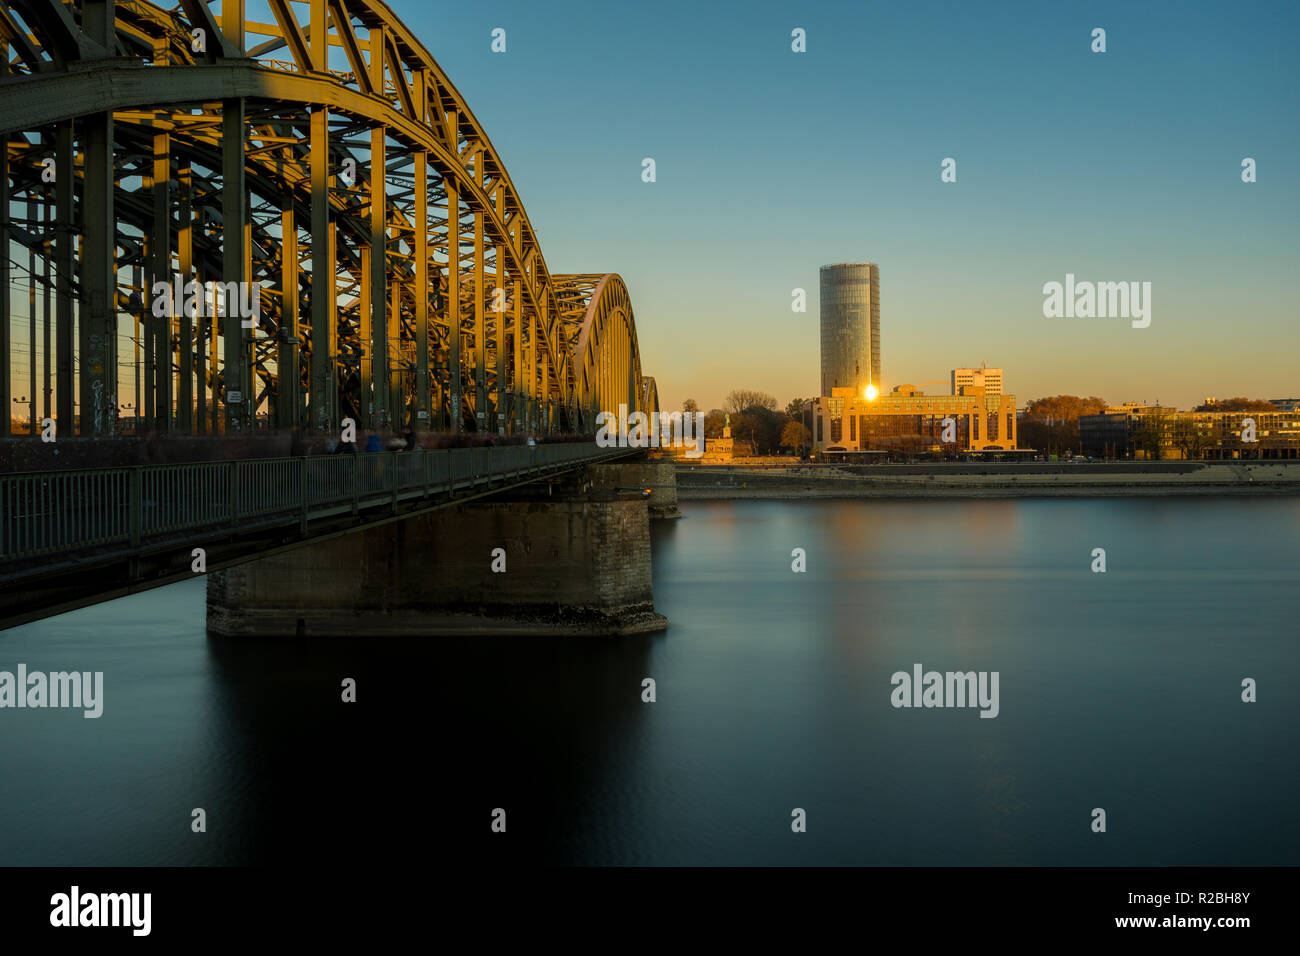 View of the Hohenzollern Bridge, the Hyatt Regency, the Cologne Triangle and the long River Rhine at the Blue Hour in Germany Cologne 2018. Stock Photo